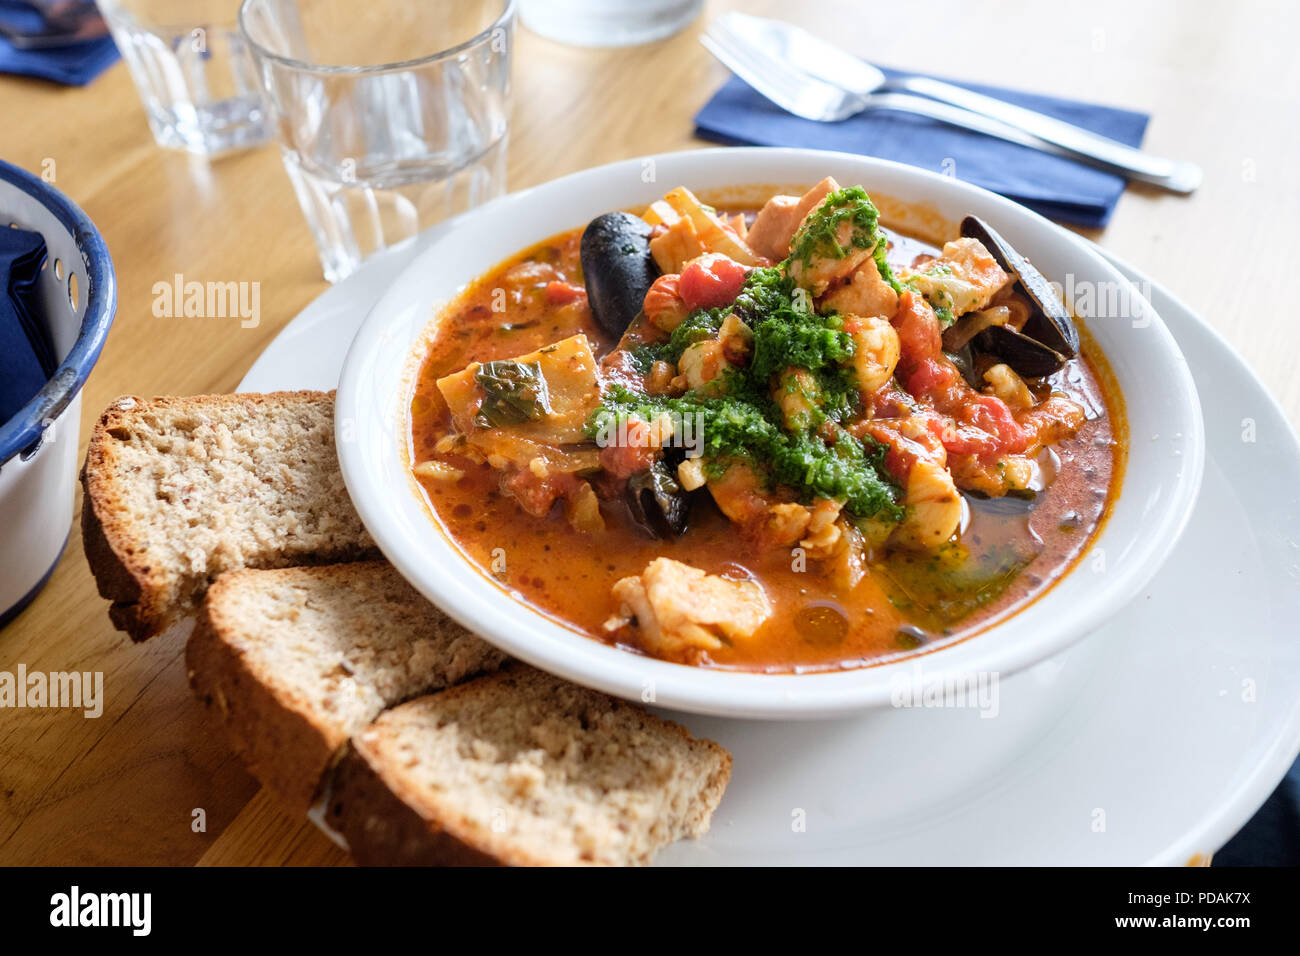 Café Fish Stew at Café Fish in Tobermory, Isle of Mull, Scotland, containing haddock, salmon, smoked haddock, queenies and mussels in a rich tomato sa Stock Photo